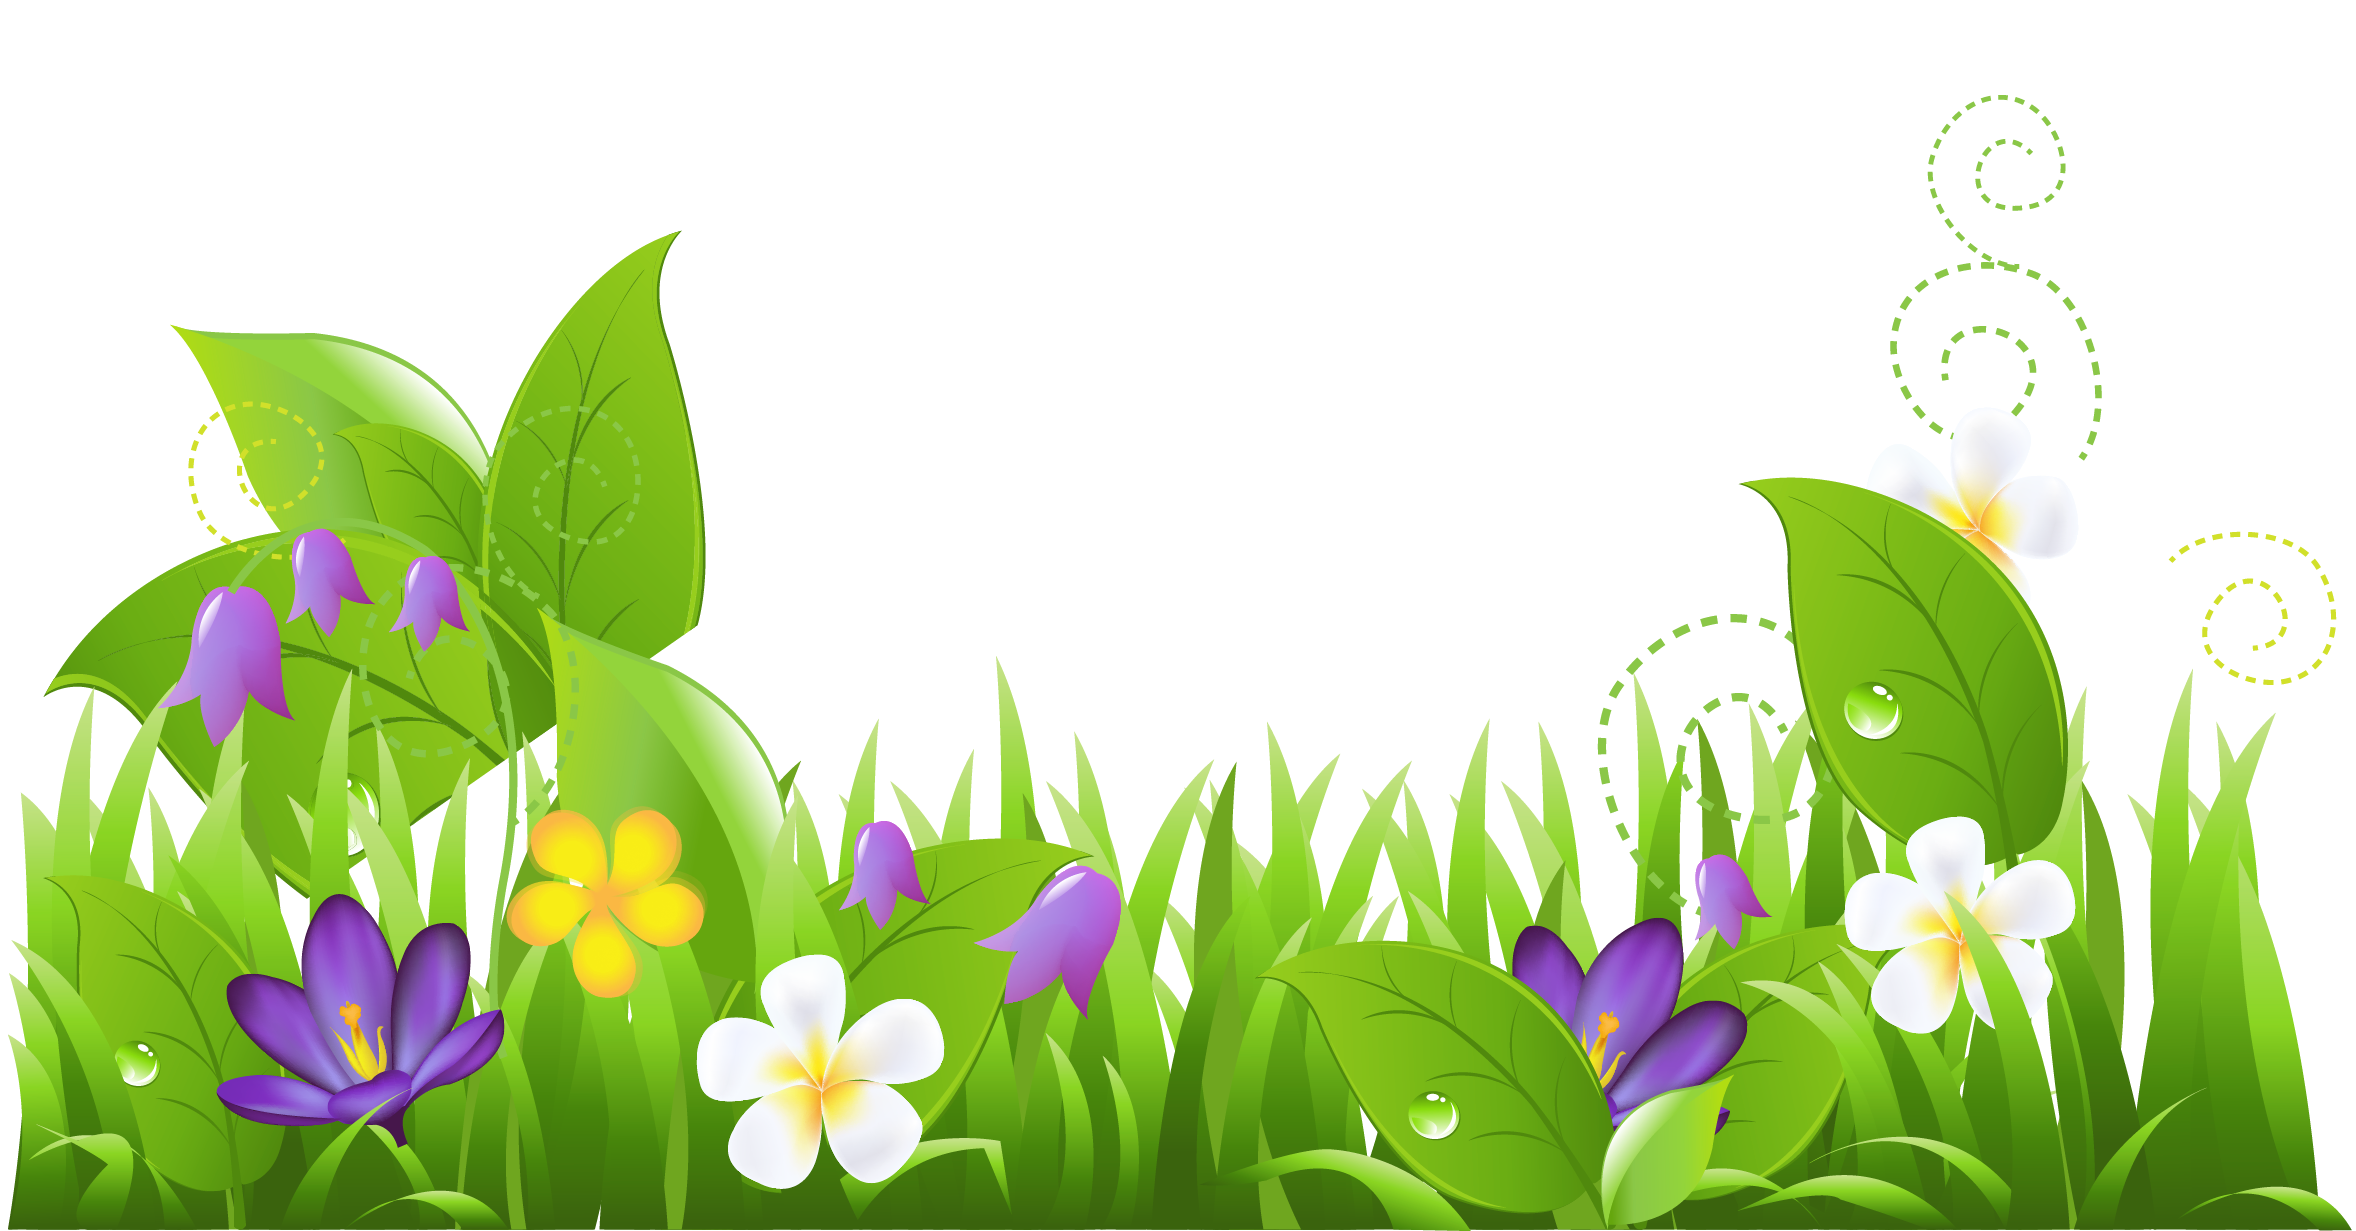 Grass And Flowers Image Free Download Png Clipart